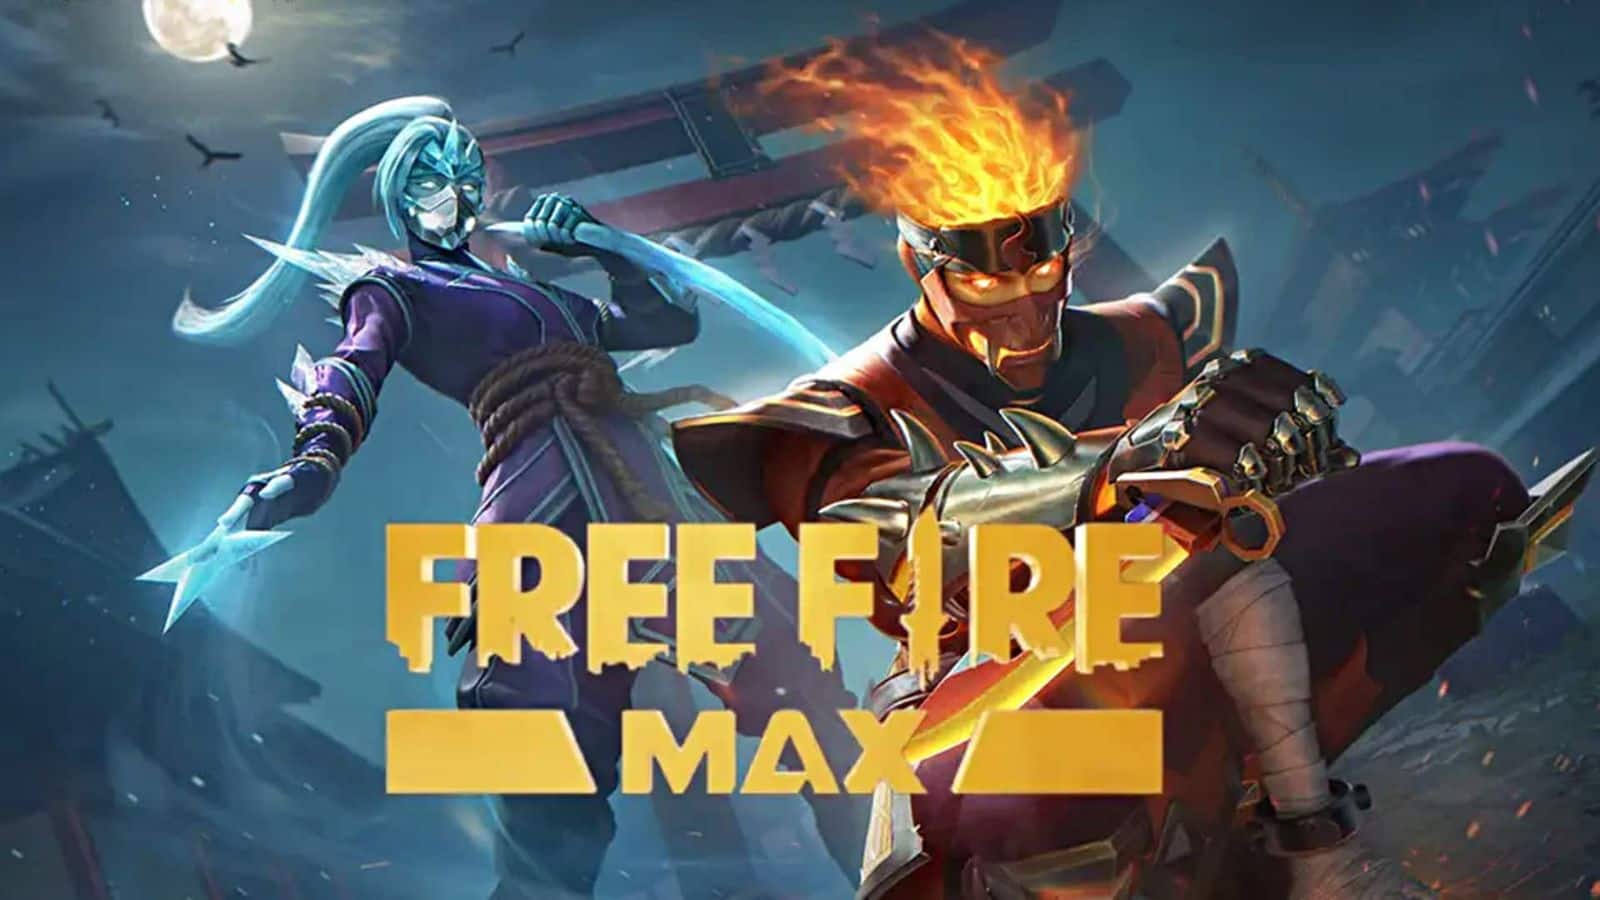 Garena Free Fire MAX May 1 redeem codes now available